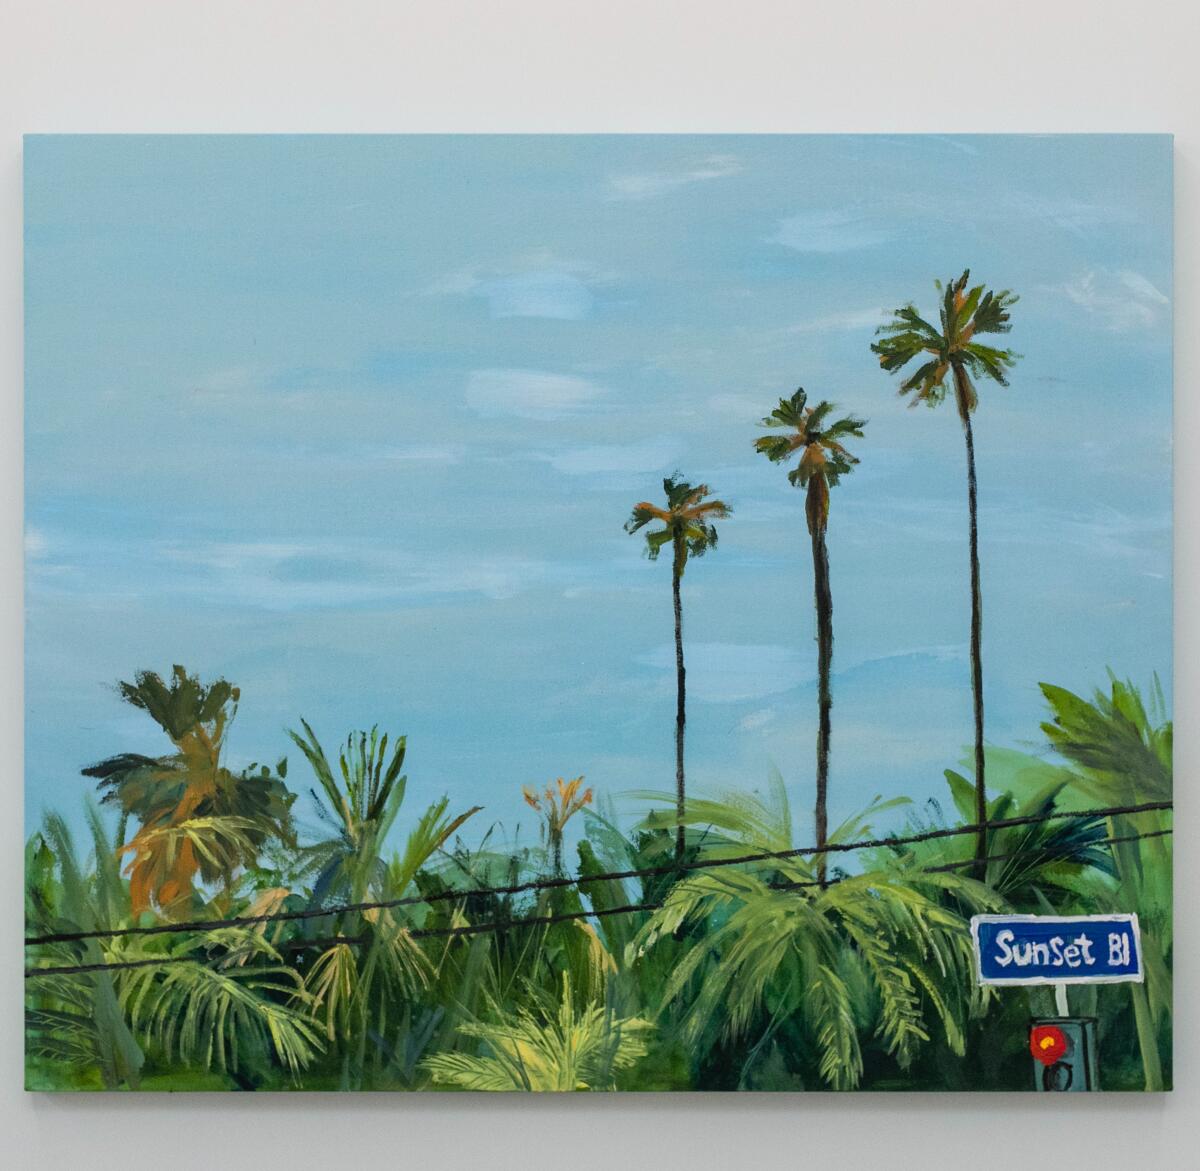 A painting featuring green palm trees and the Sunset Boulevard sign above a red traffic light.